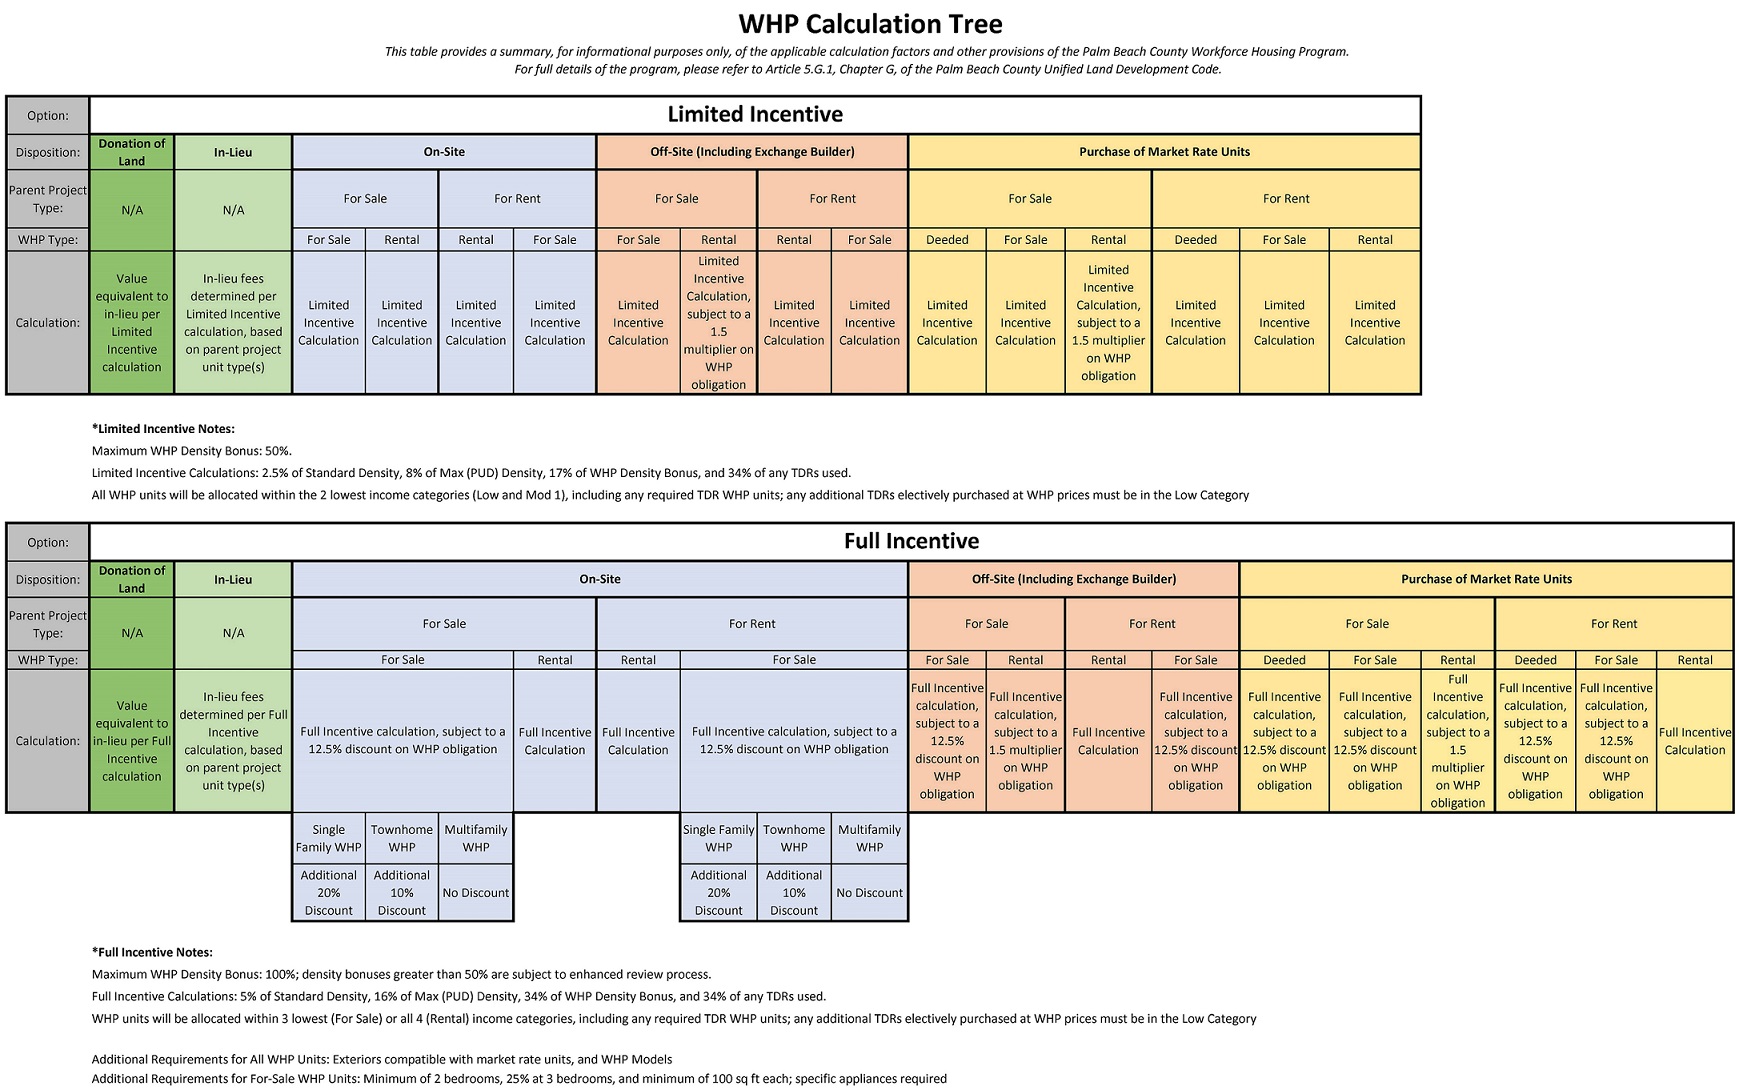 WHP incentive Calc Tree 2